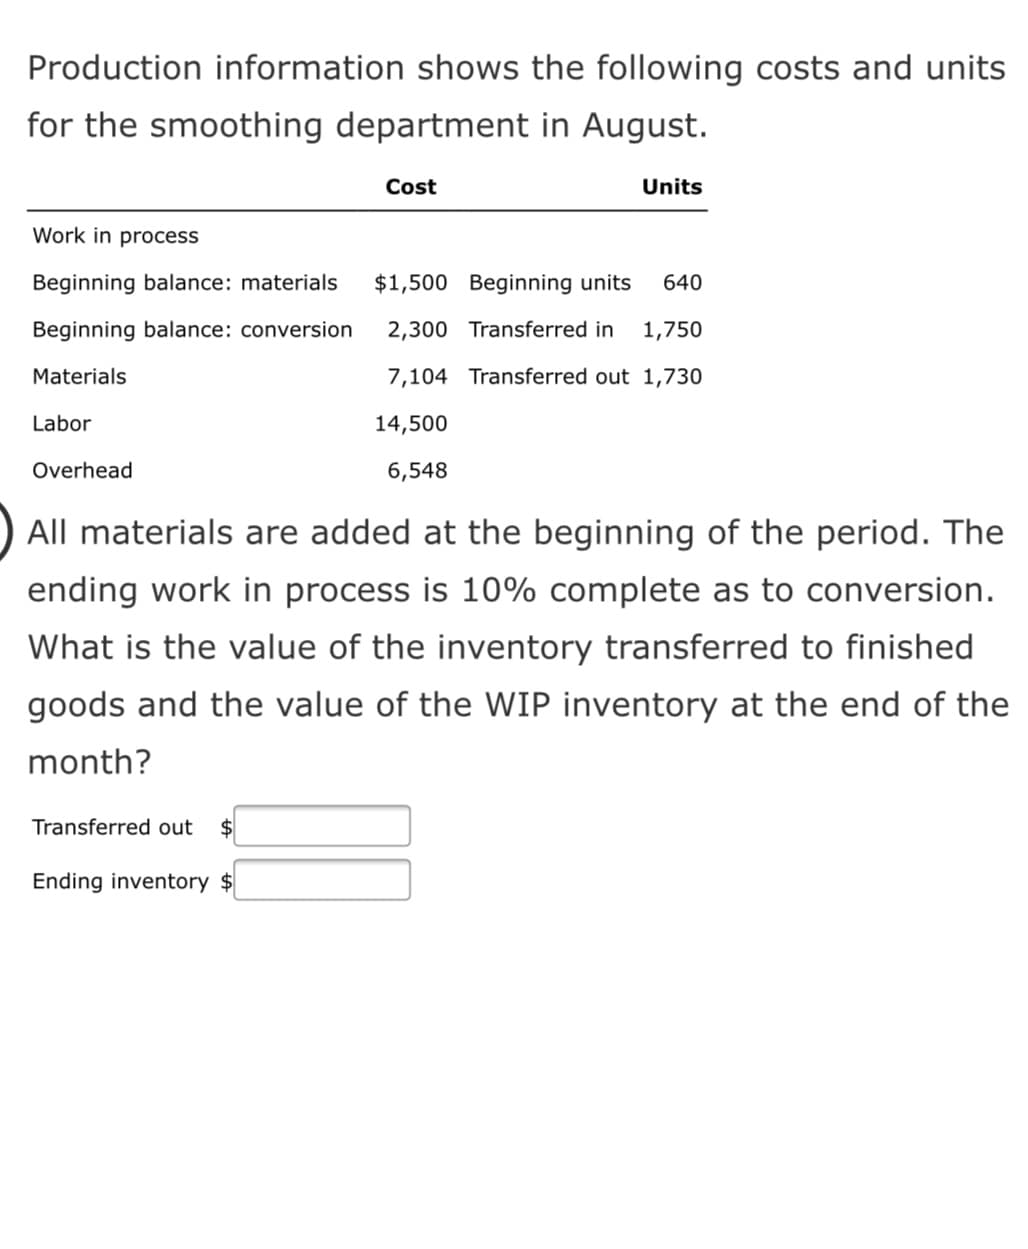 Production information shows the following costs and units
for the smoothing department in August.
Cost
Units
Work in process
Beginning balance: materials
$1,500 Beginning units
640
Beginning balance: conversion
2,300 Transferred in
1,750
Materials
7,104 Transferred out 1,730
Labor
14,500
Overhead
6,548
All materials are added at the beginning of the period. The
ending work in process is 10% complete as to conversion.
What is the value of the inventory transferred to finished
goods and the value of the WIP inventory at the end of the
month?
Transferred out
$4
Ending inventory $
